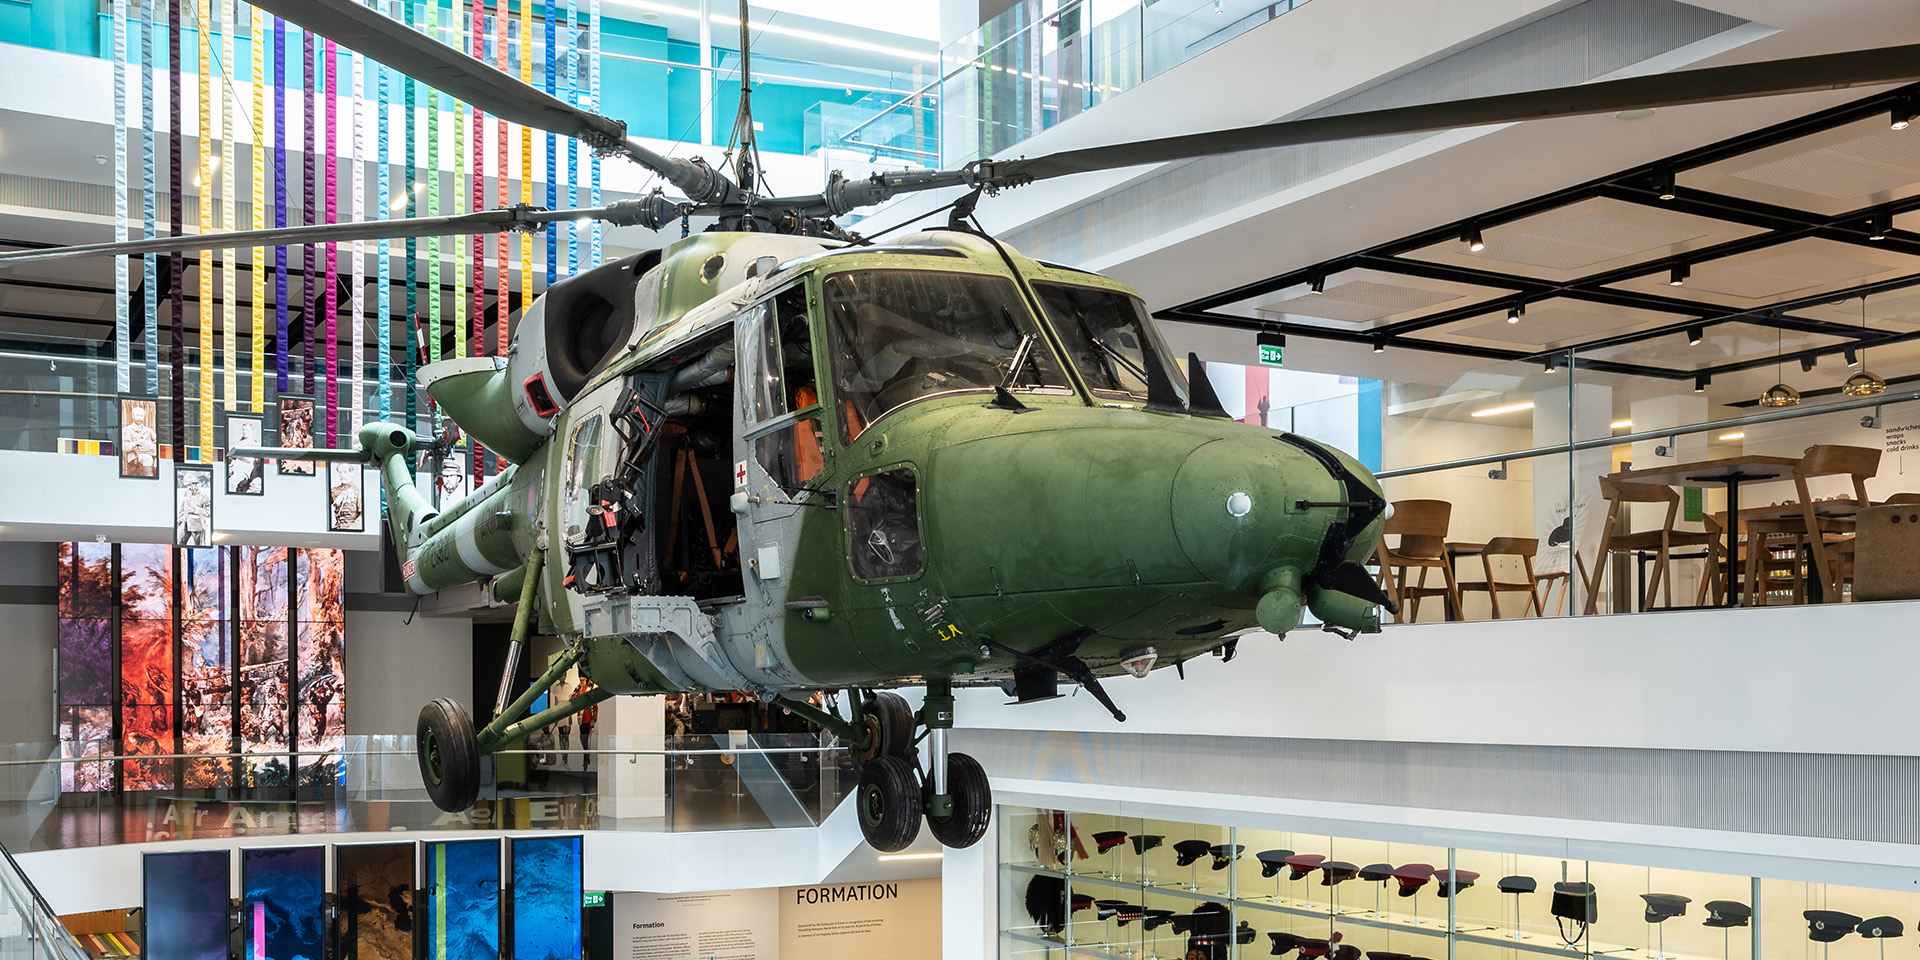 Lynx helicopter on display at the National Army Museum